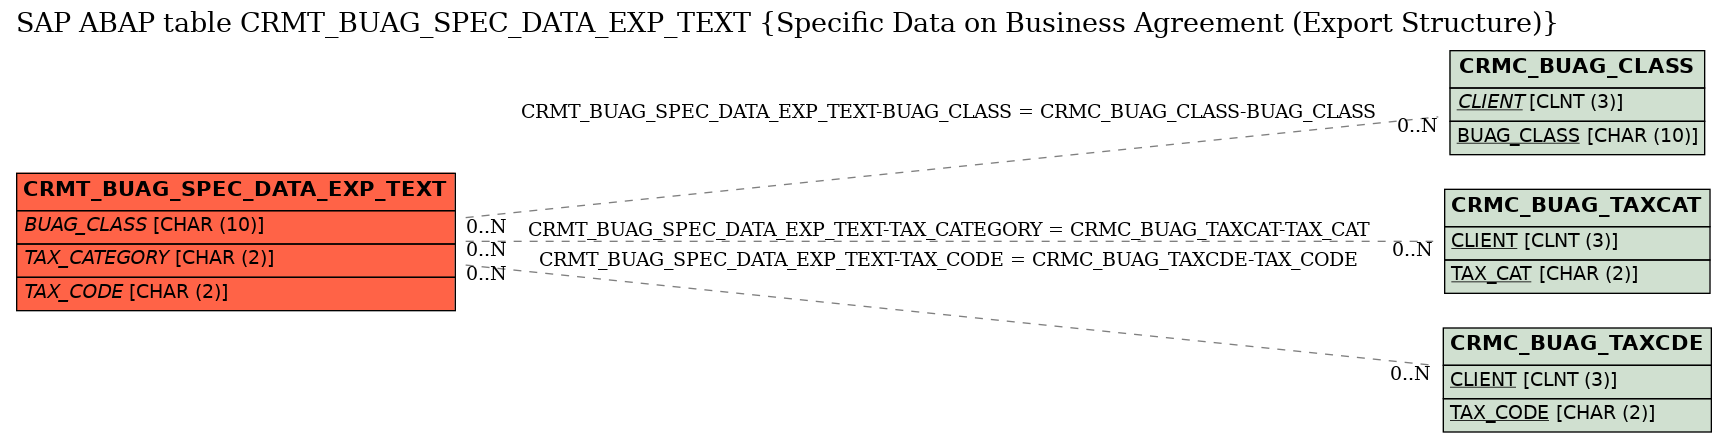 E-R Diagram for table CRMT_BUAG_SPEC_DATA_EXP_TEXT (Specific Data on Business Agreement (Export Structure))